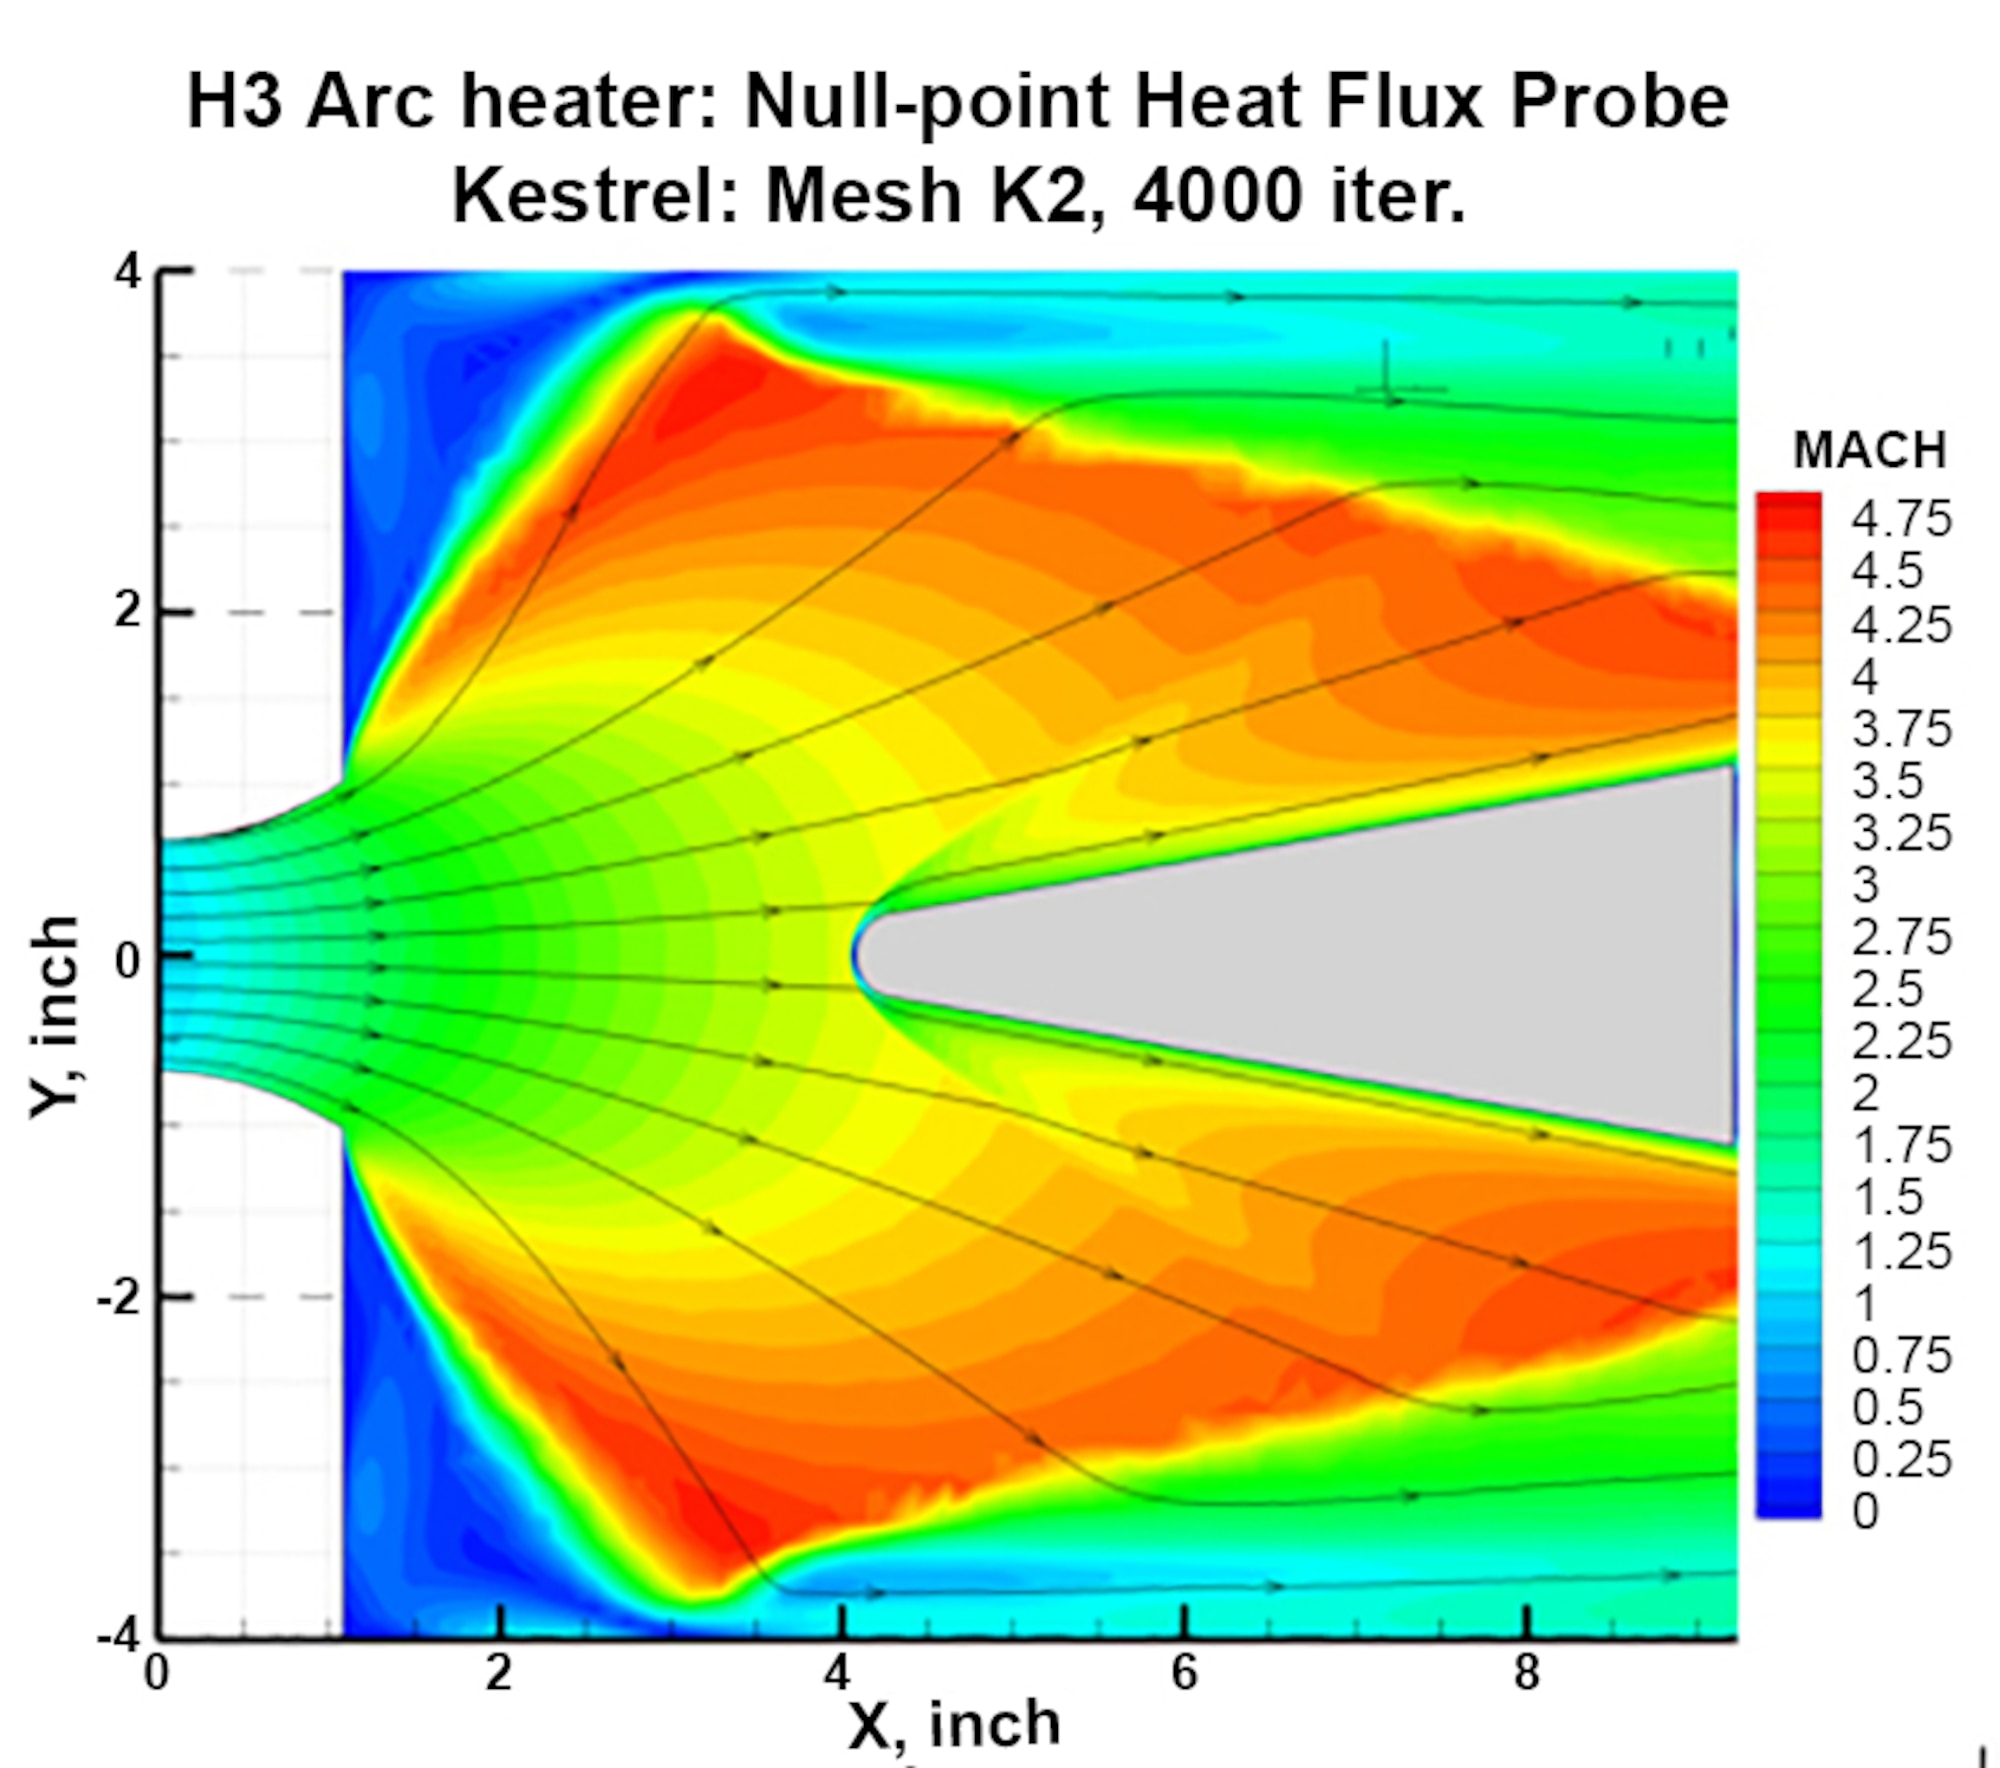 The thermodynamic capability of the Department of Defense High Performance Computing Modernization Program CREATE™-AV Kestrel software, which is used to calculate fluid flows via computational fluid dynamics, was extended to the equilibrium air model in the H3 arc-heated facility at Arnold Air Force Base. With this, the impact of heat transfer on test articles, such as the one pictured in the graphic, can be computed at higher speeds. (Graphic provided)